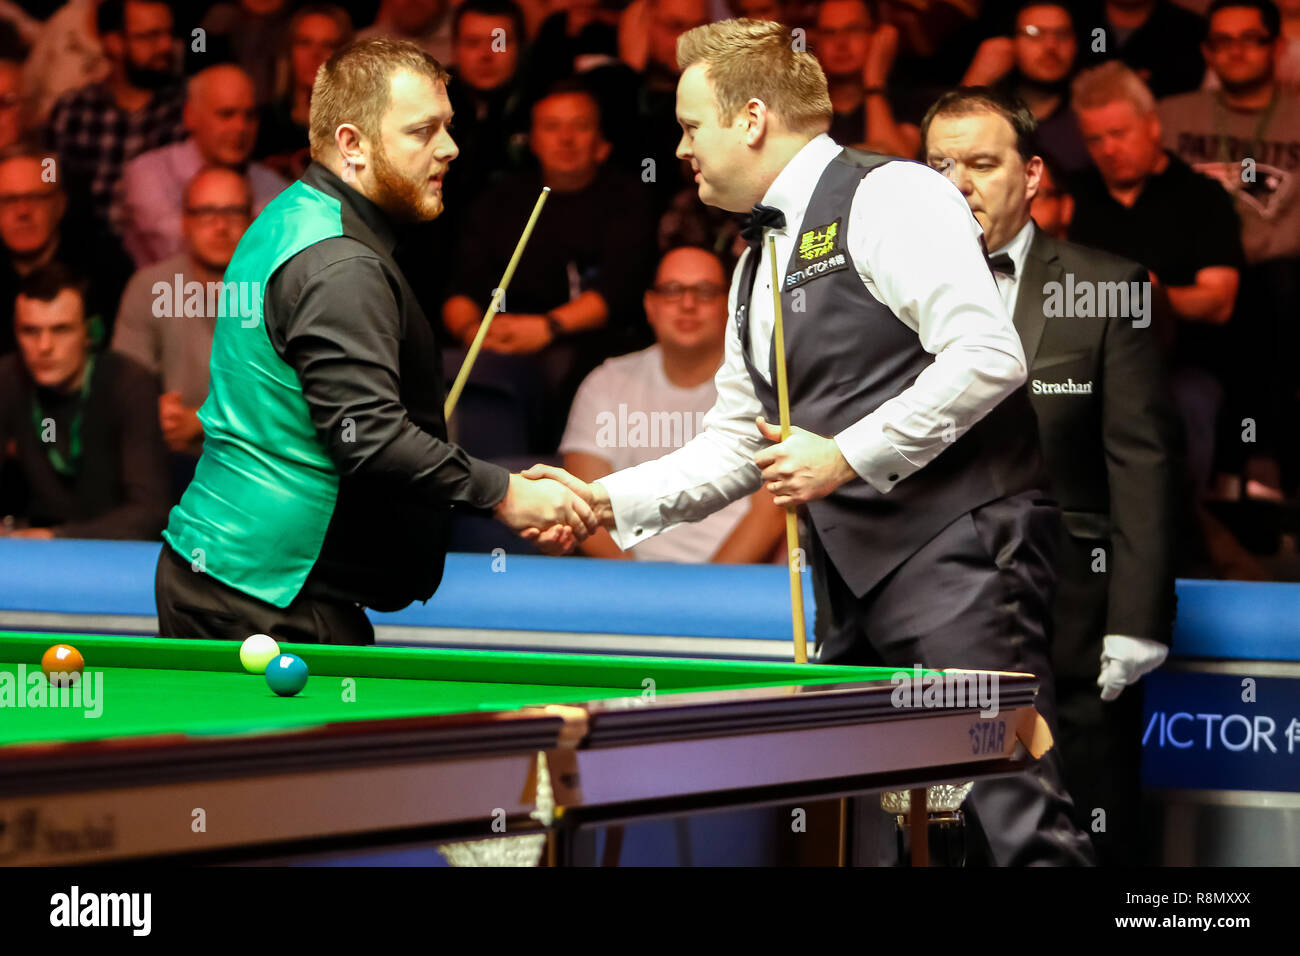 Glasgow, UK. 16th Dec 2018. Betvictor Home Nations Series Scottish Open Final between Shaun Murphy (NIR) Vs Mark Allen (ENG). Action from the evening session with Mark Allen Stating the Session 5-3 ahead (Best of 17)  The Players shake hands at the start of the evening session. Credit: Colin Poultney/Alamy Live News Stock Photo